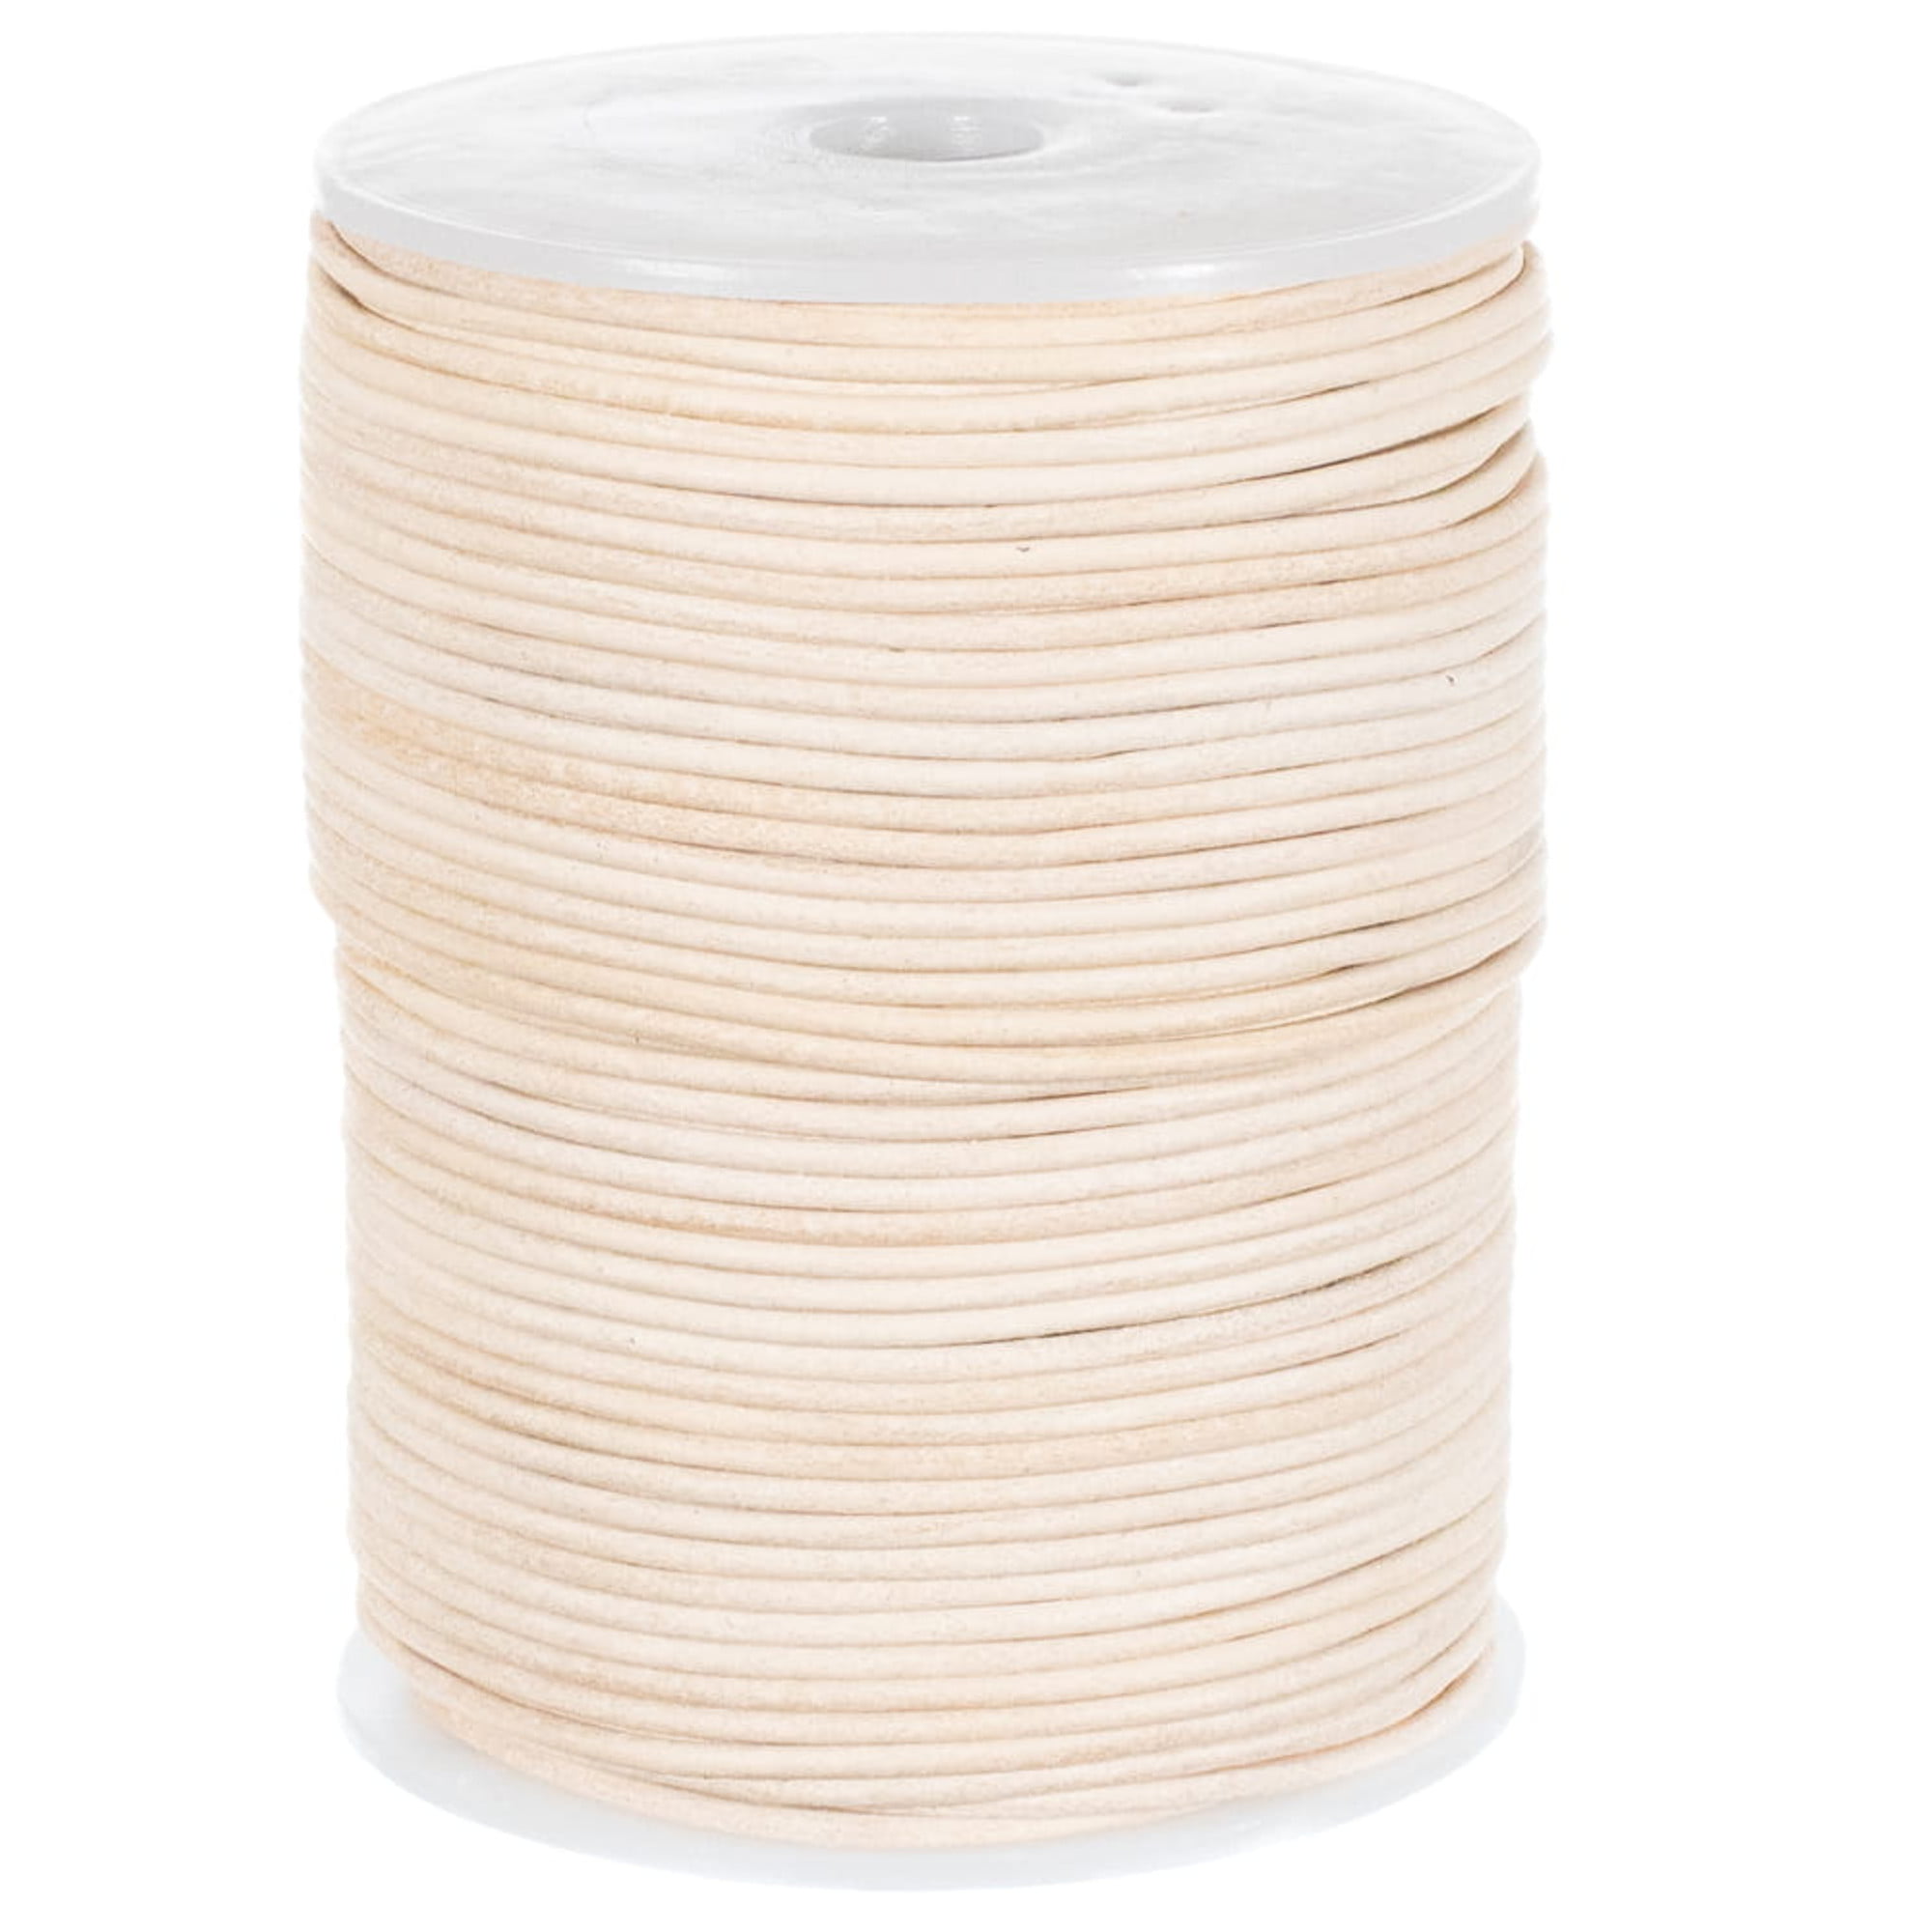 10 yards 30 feet 3MM Pearl White Braided Bolo Leather Lace Cord Roll Spool 